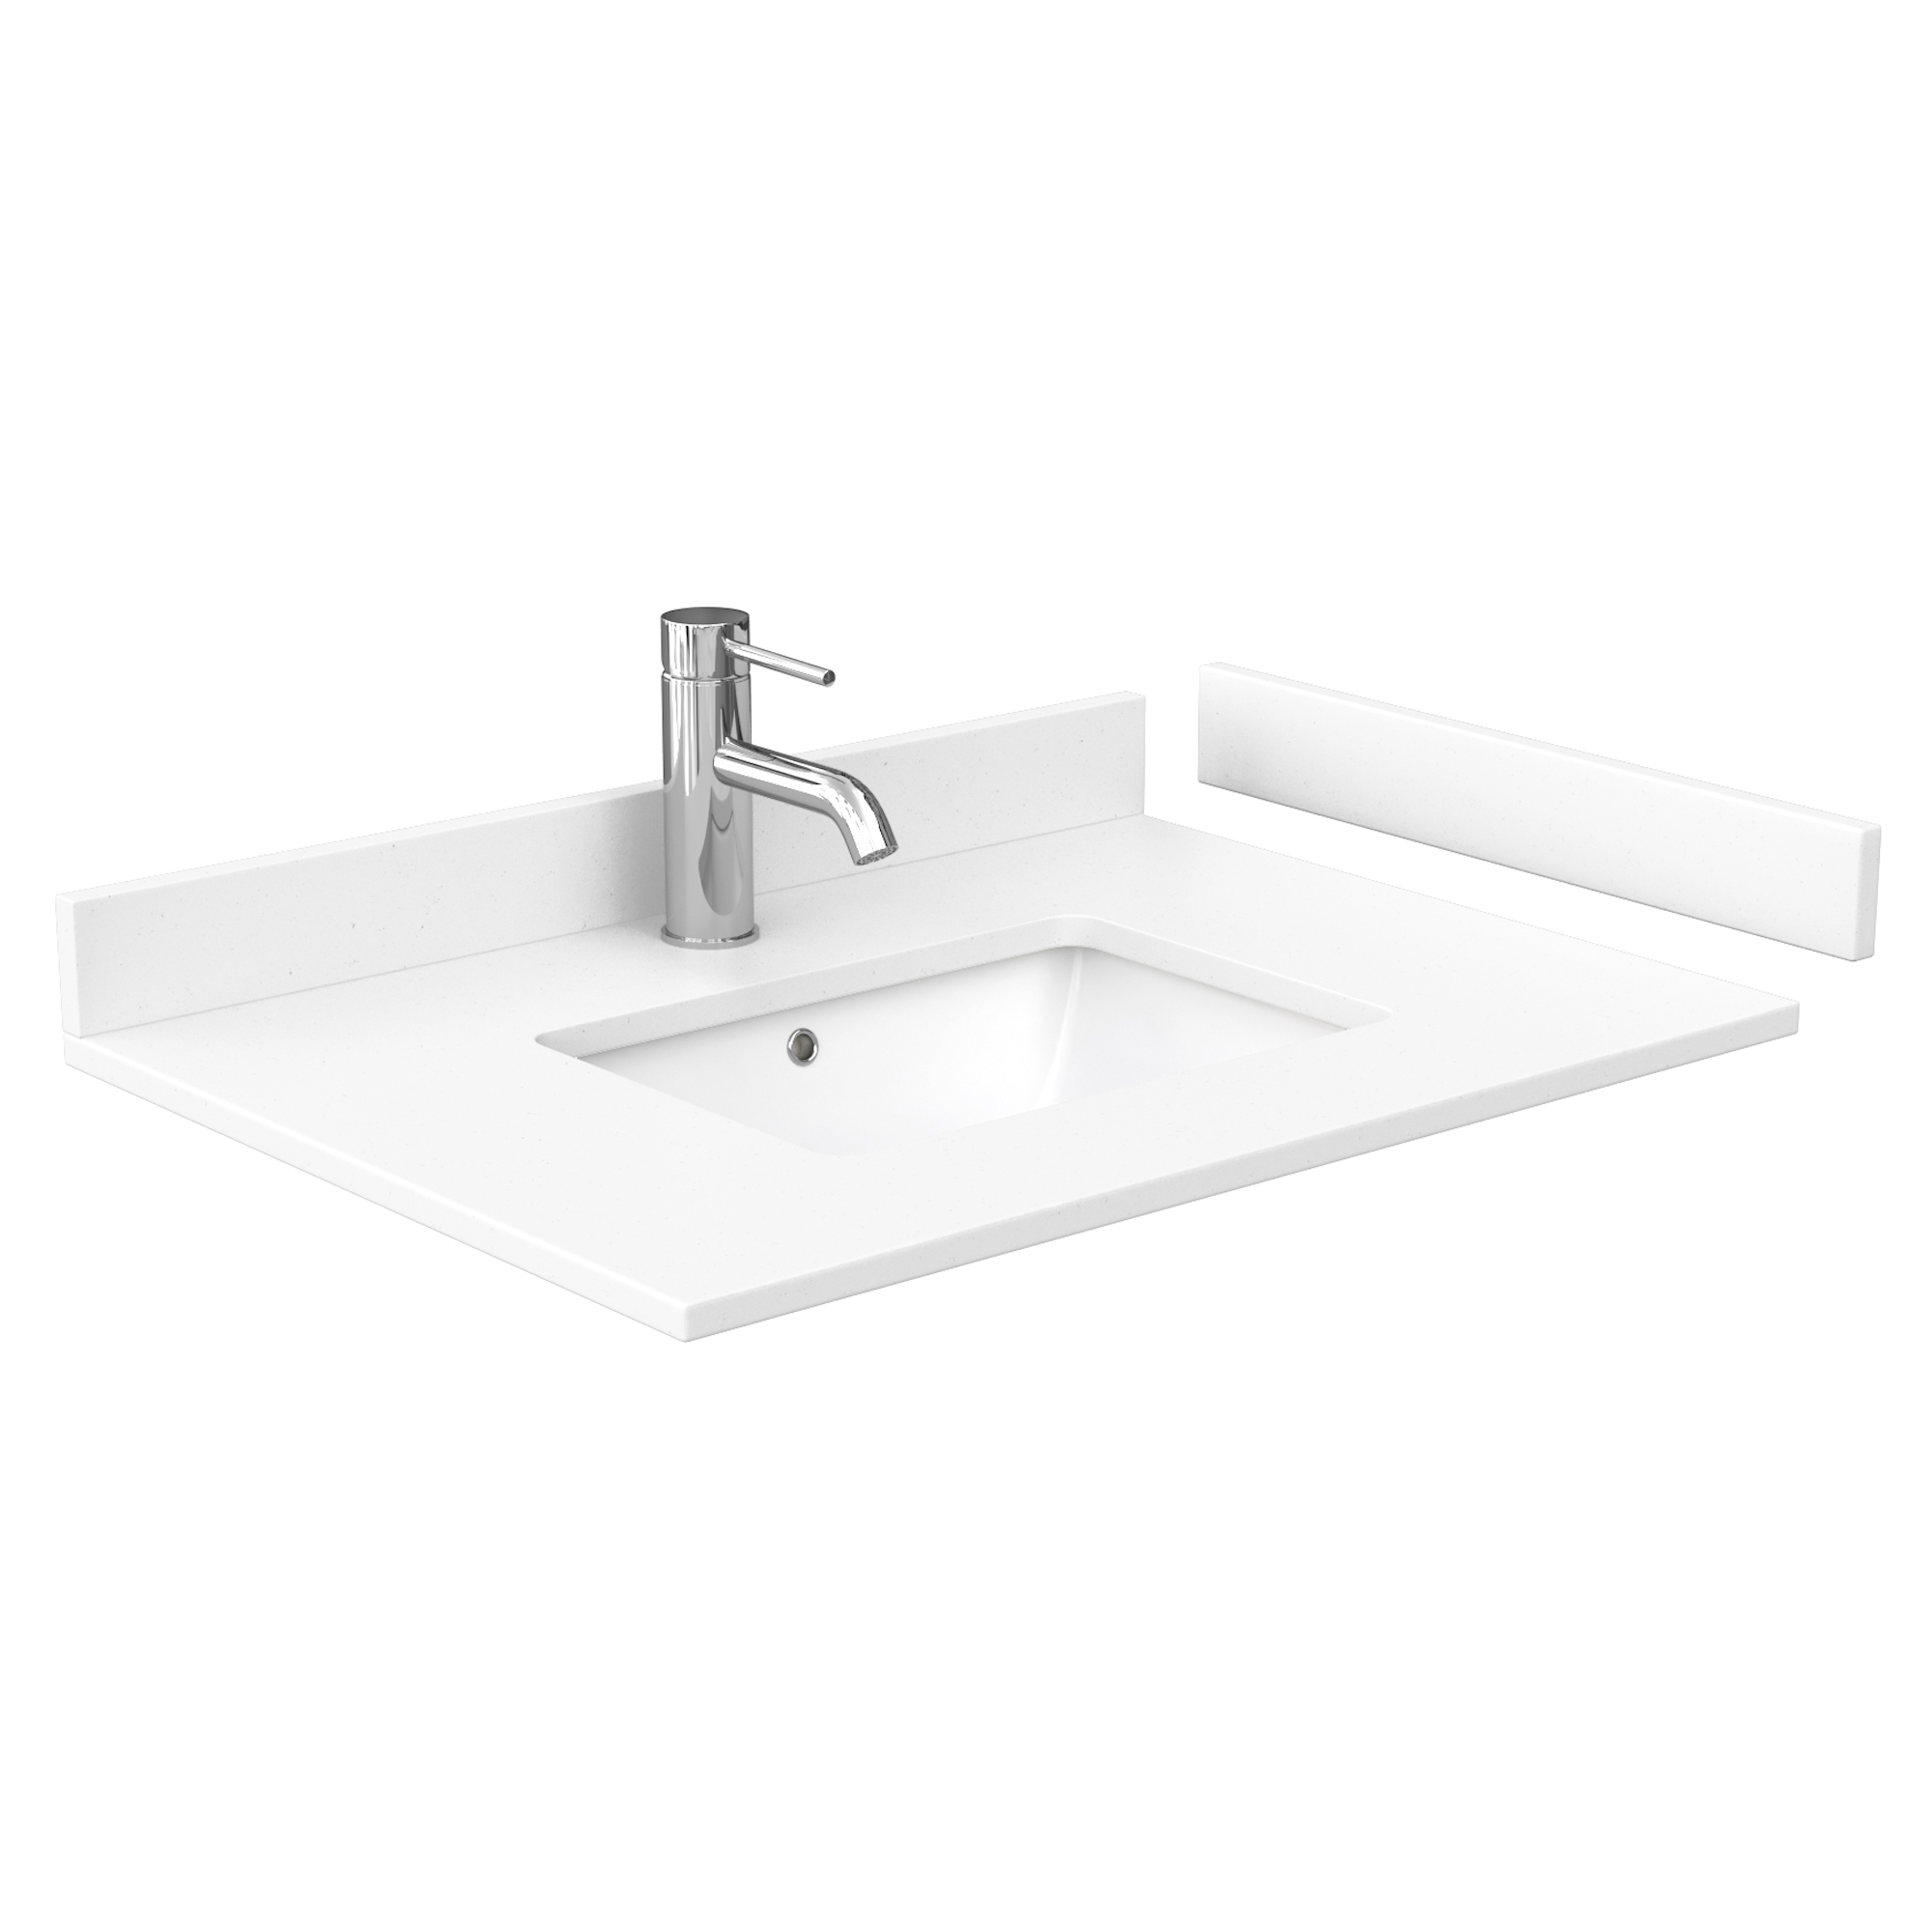 Deborah 30" Single Vanity in White | Beautiful bathroom furniture for every home - Wyndham Collection